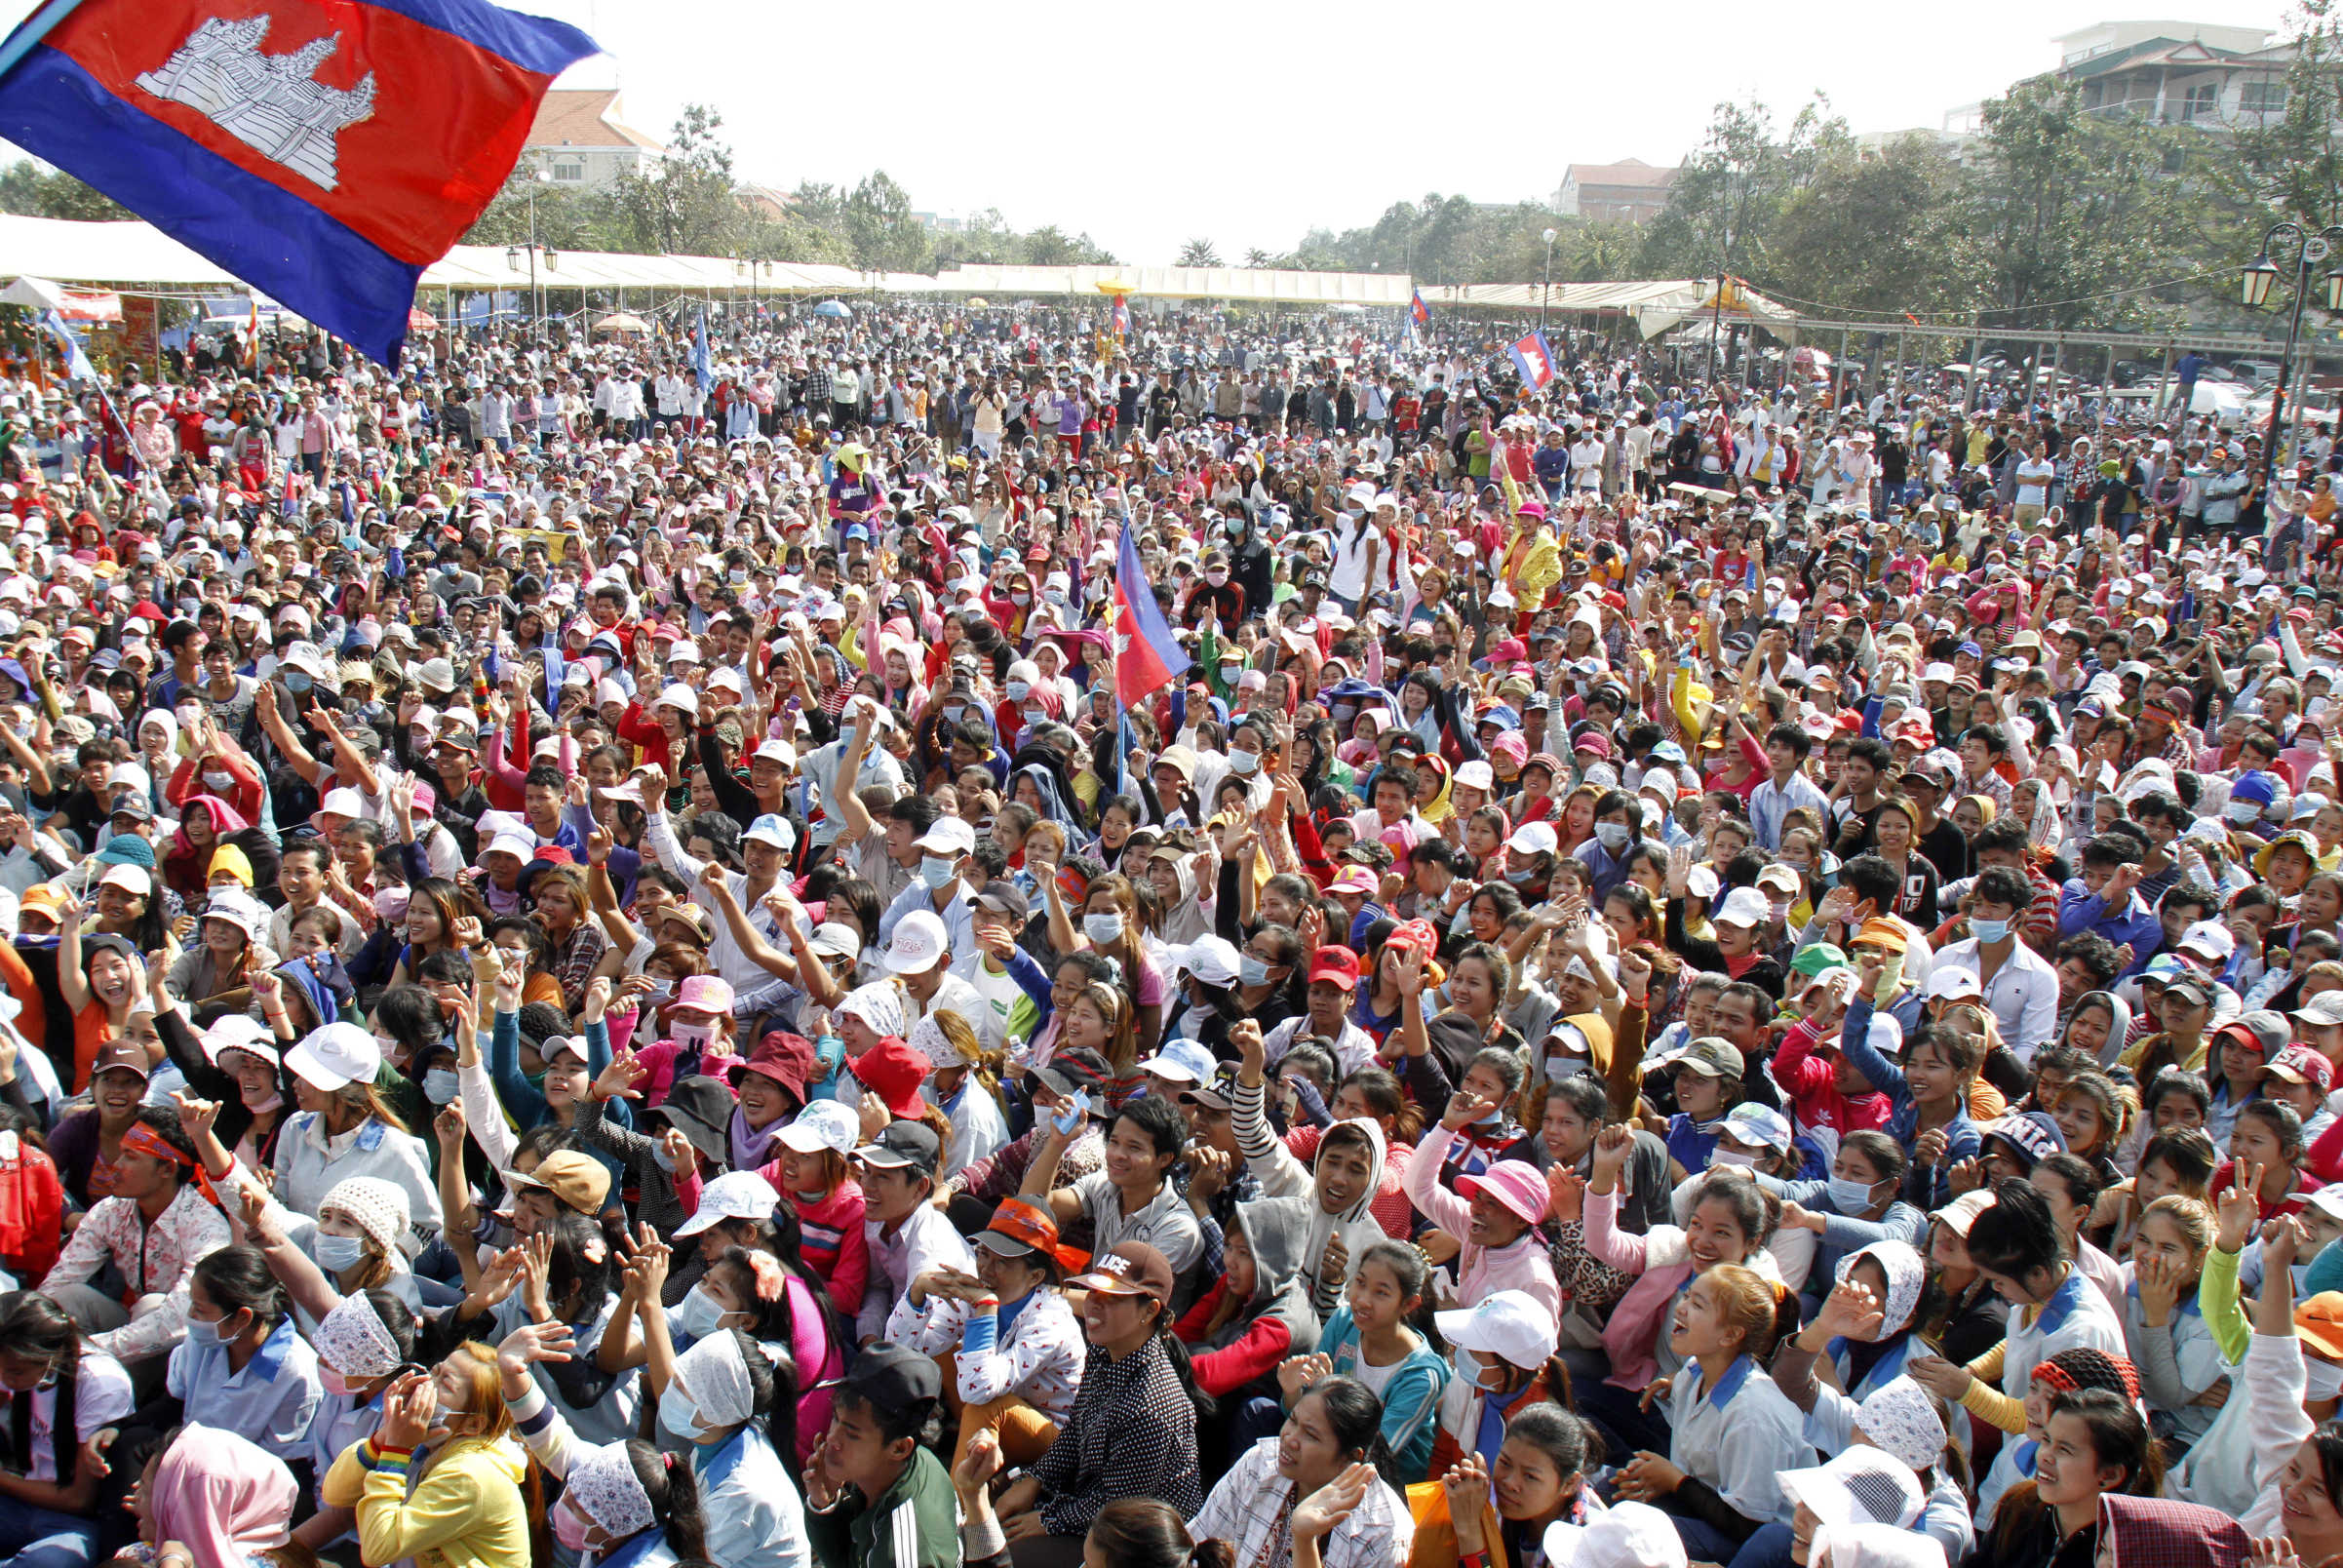 Garment workers in Phnom Penh rally against low wages. Photo: Xinhua